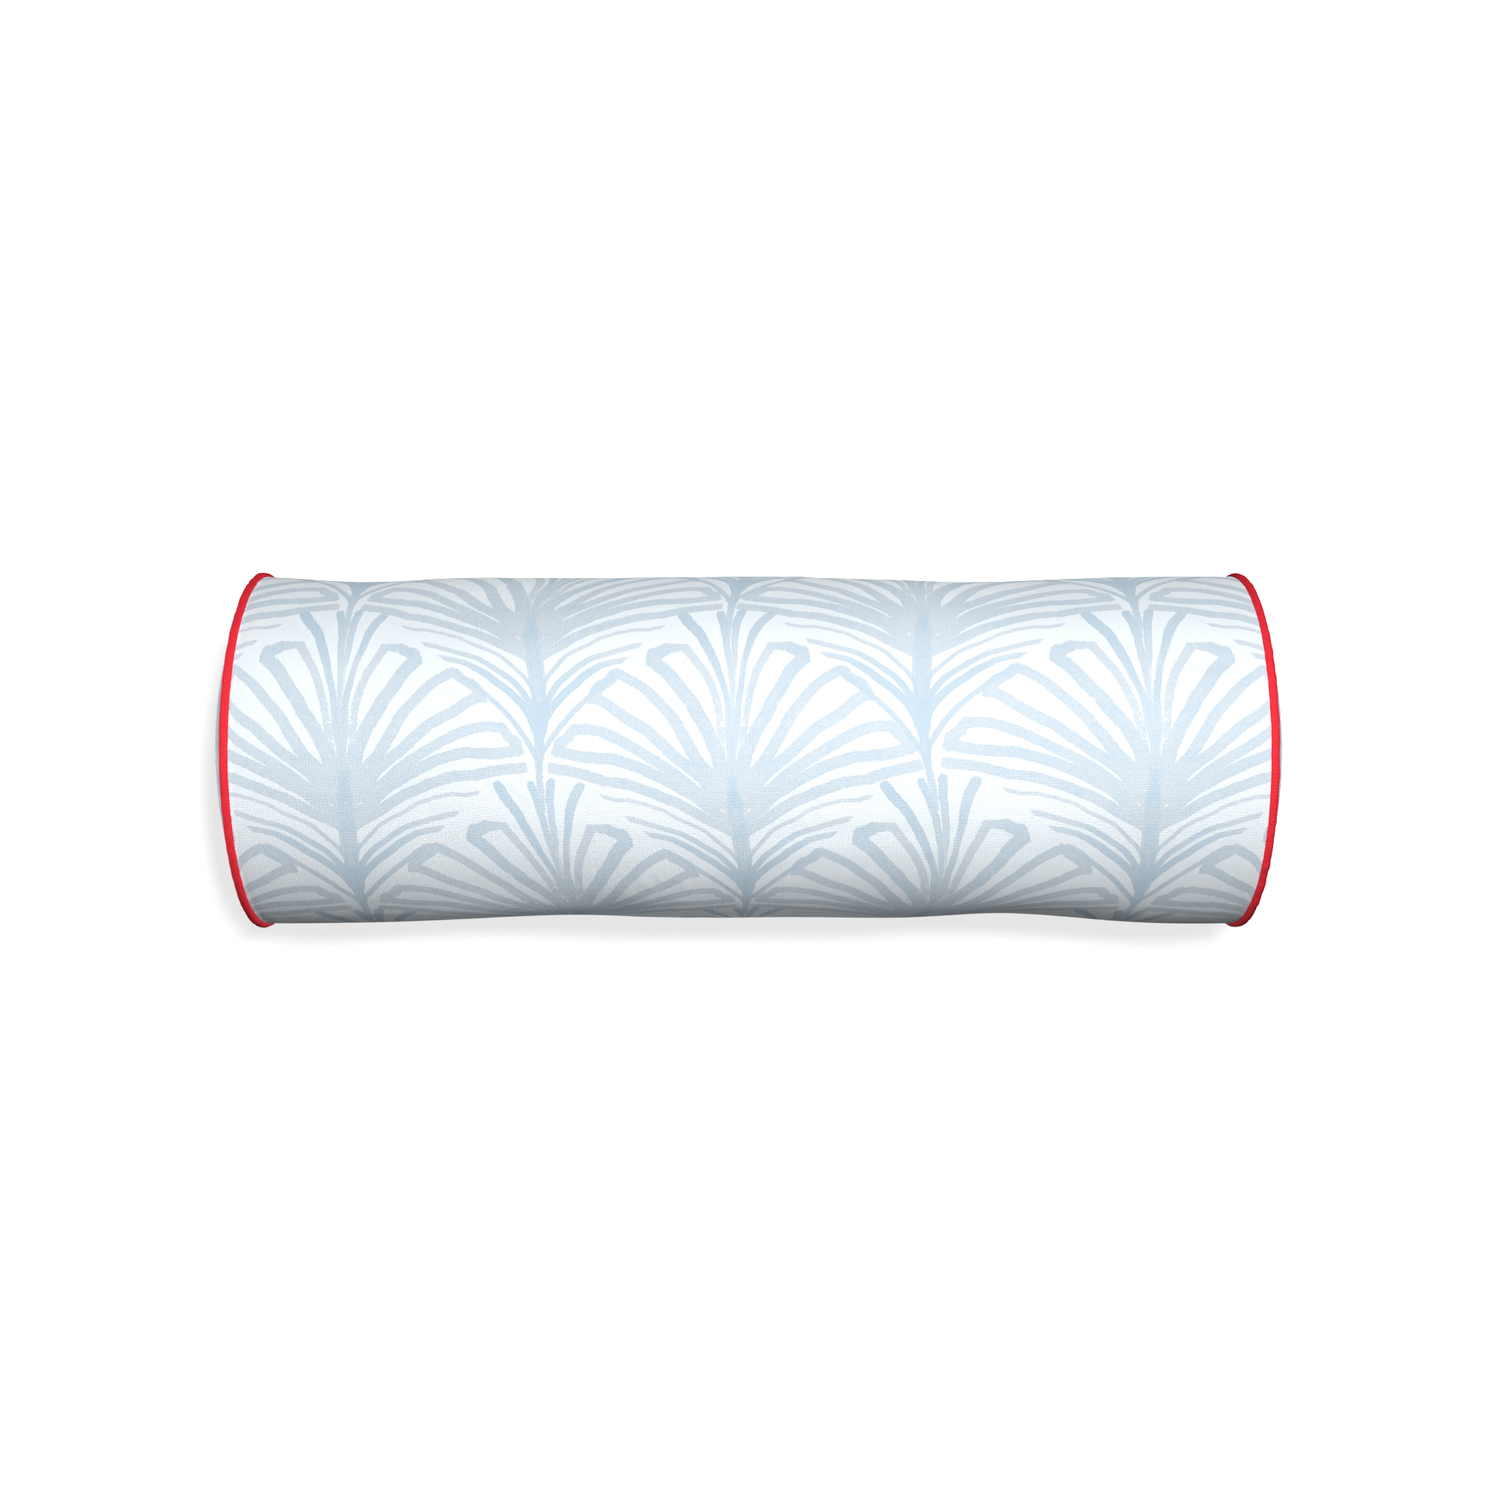 Bolster suzy sky custom sky blue palmpillow with cherry piping on white background